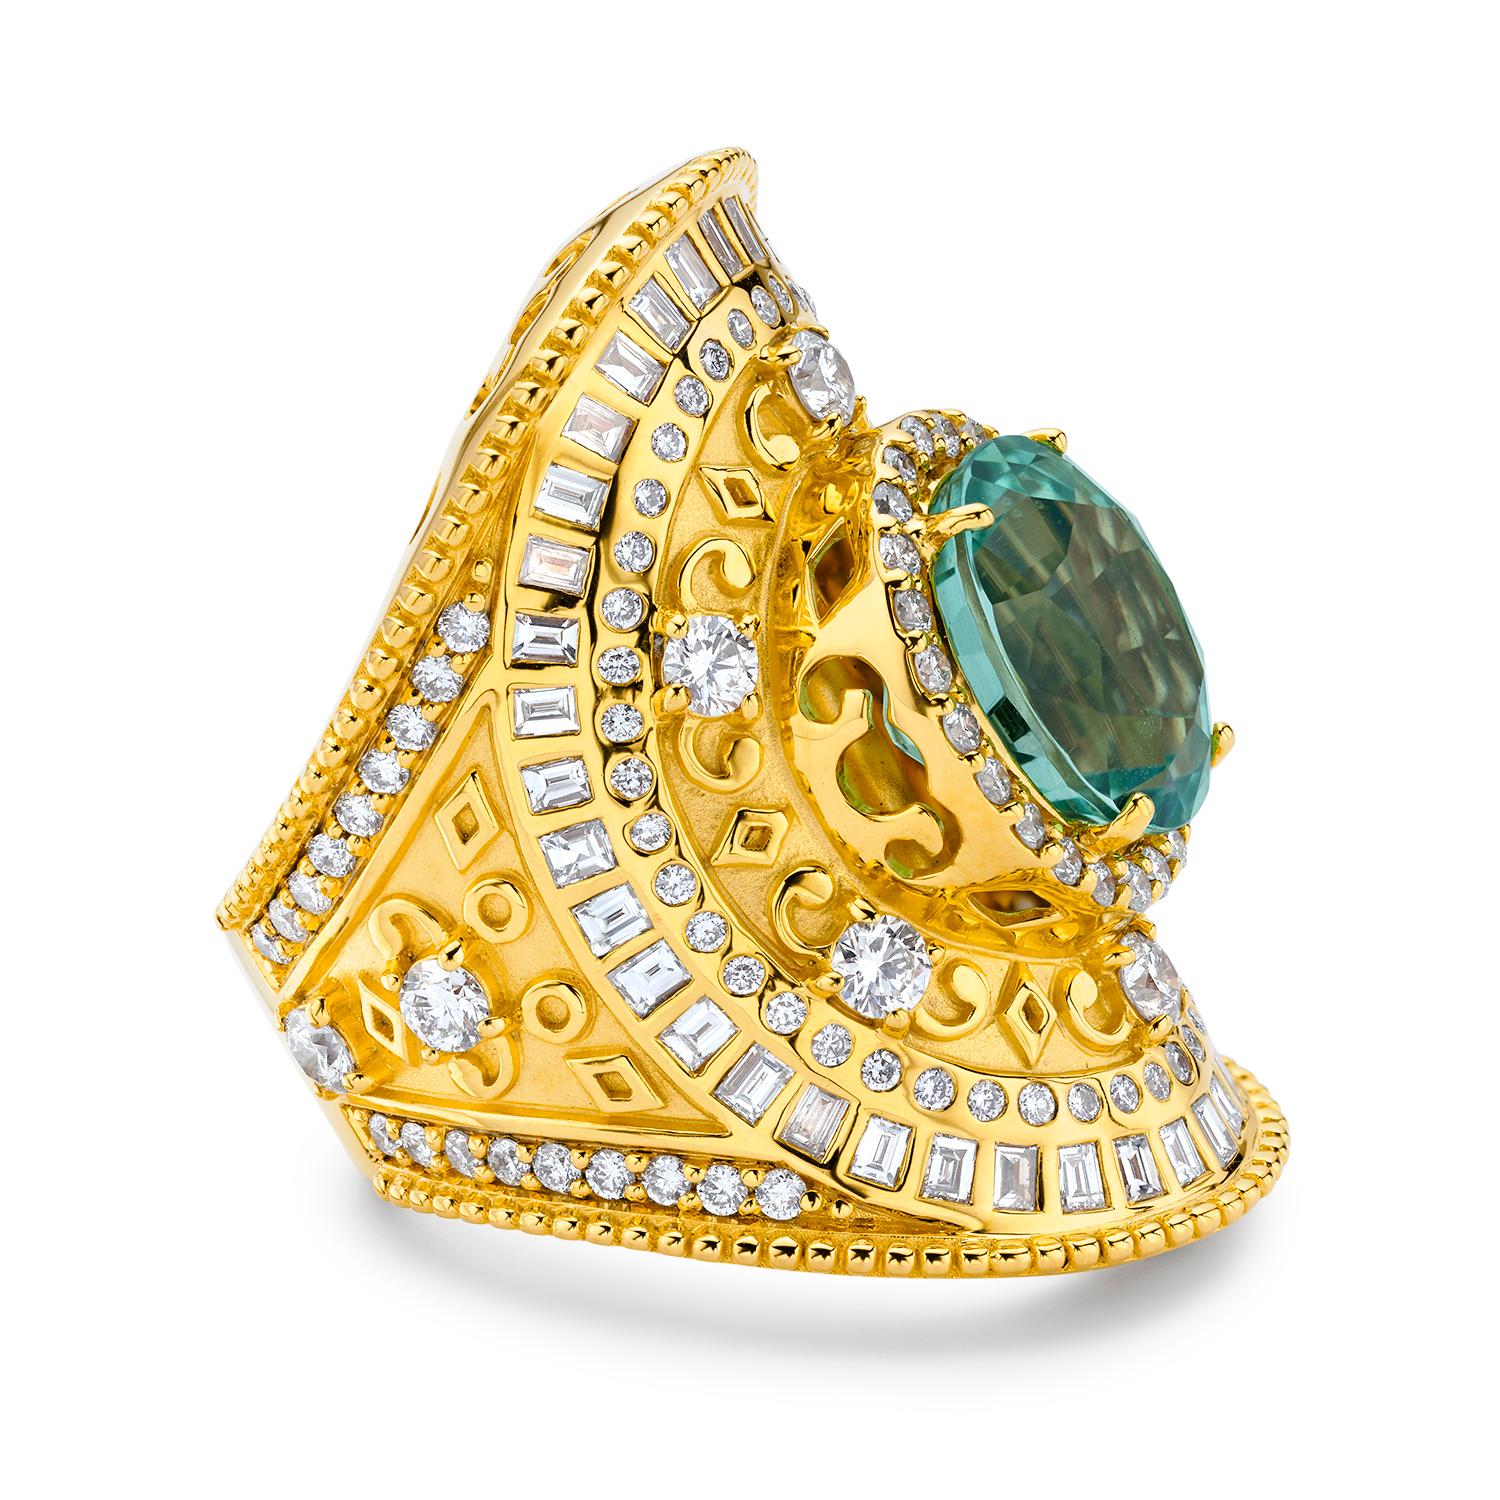 The 20K Yellow Gold Wrap Ring by Buddha Mama is an extraordinary piece that showcases a stunning 15.36ct green tourmaline centerpiece, enveloped by 2.13ctw of brilliant diamonds. This 33mm wide ring is crafted from luxurious 20K yellow gold,